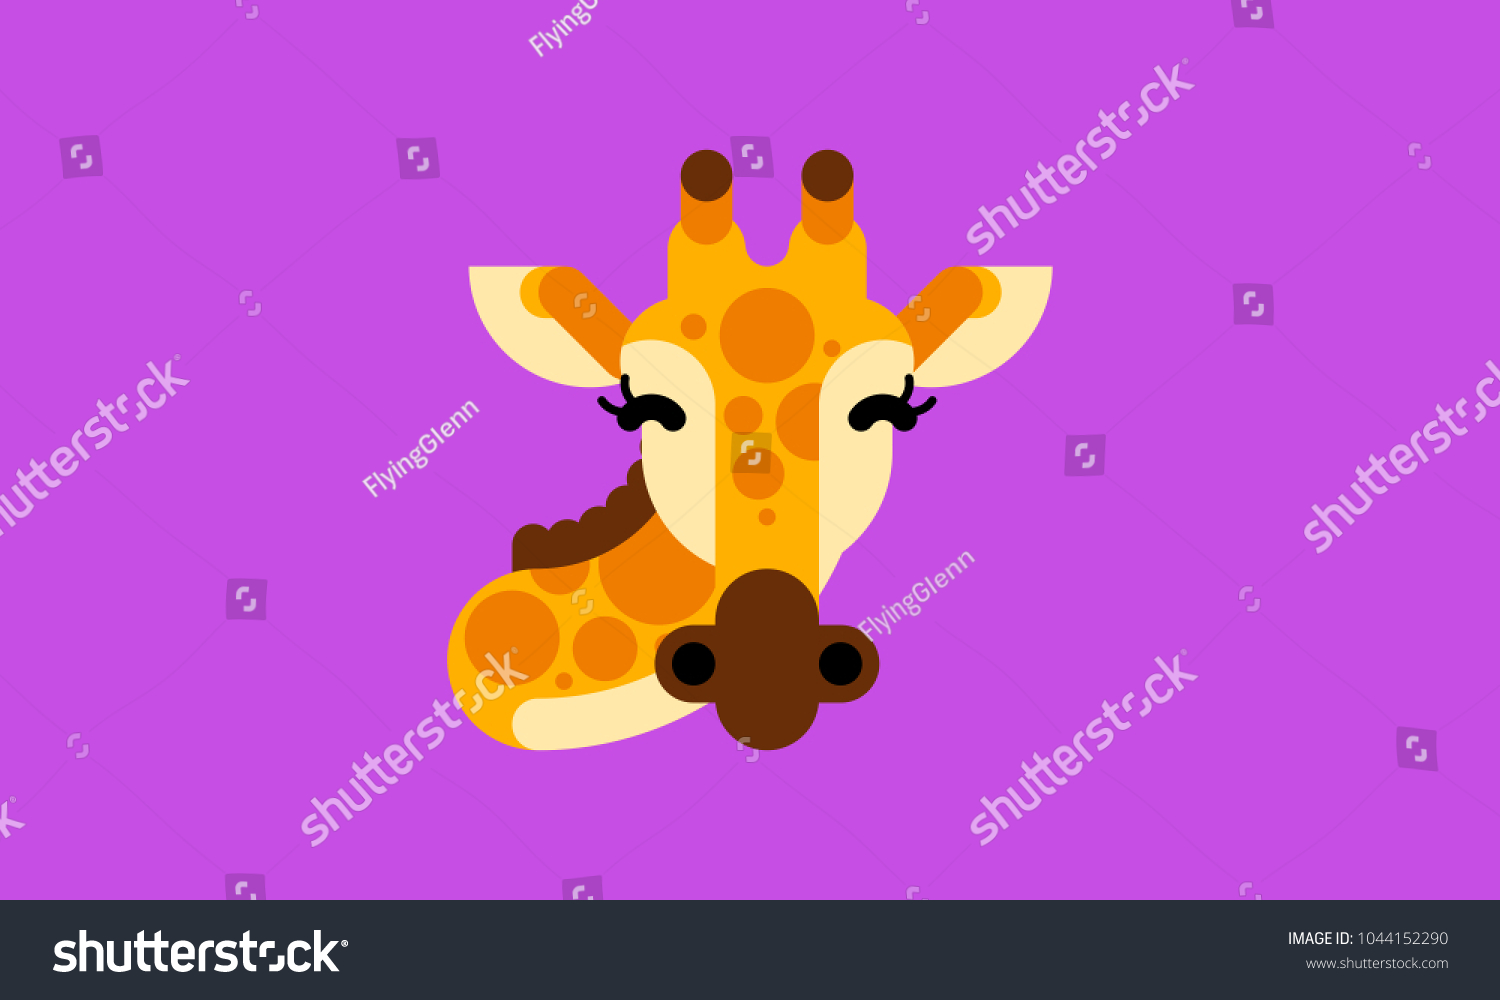 Isolated giraffe icon in modern flat style, with simple geometric shapes only #1044152290